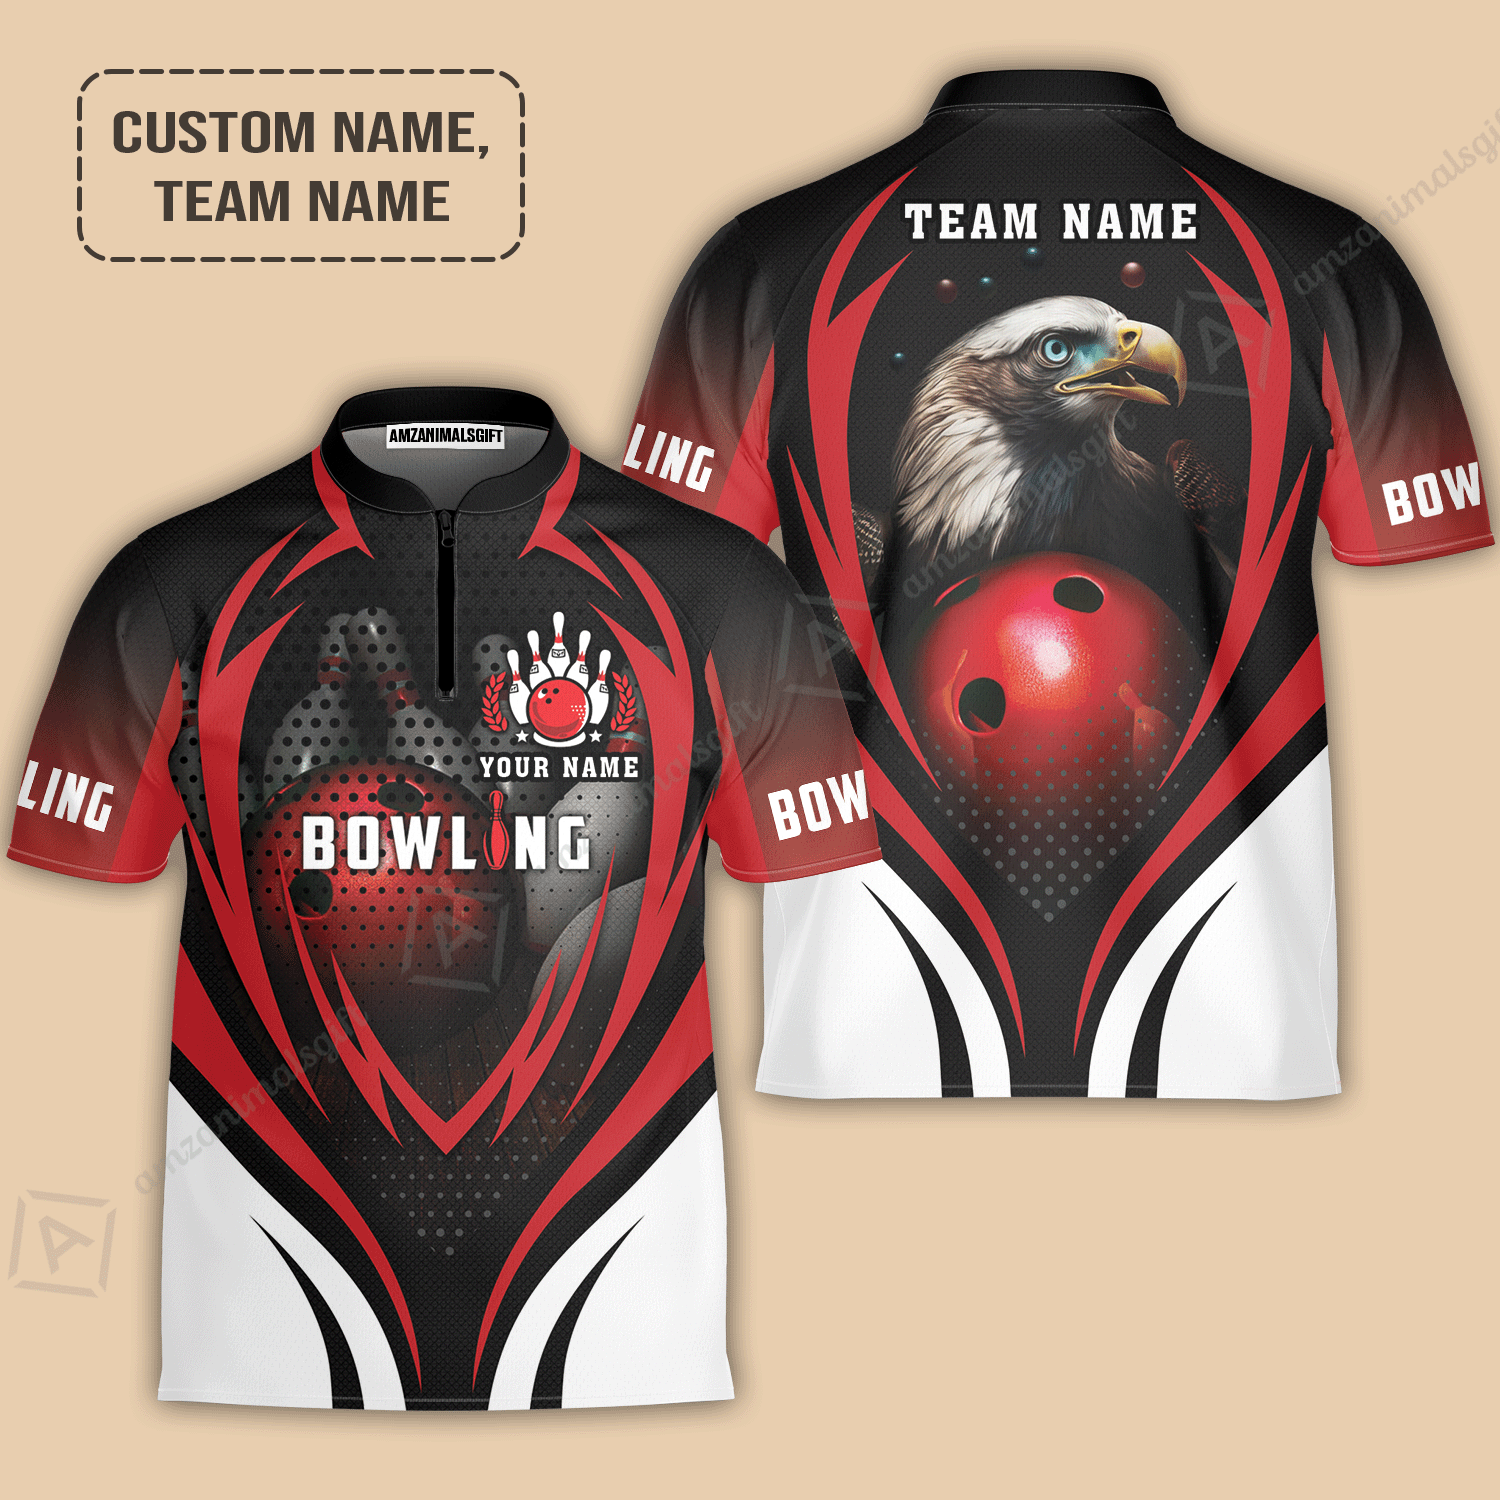 Customized Bowling Jersey, Eagle Bowling Team Ten Pin  Personalized Red Black Shirt For Friend, Family, Bowling Players